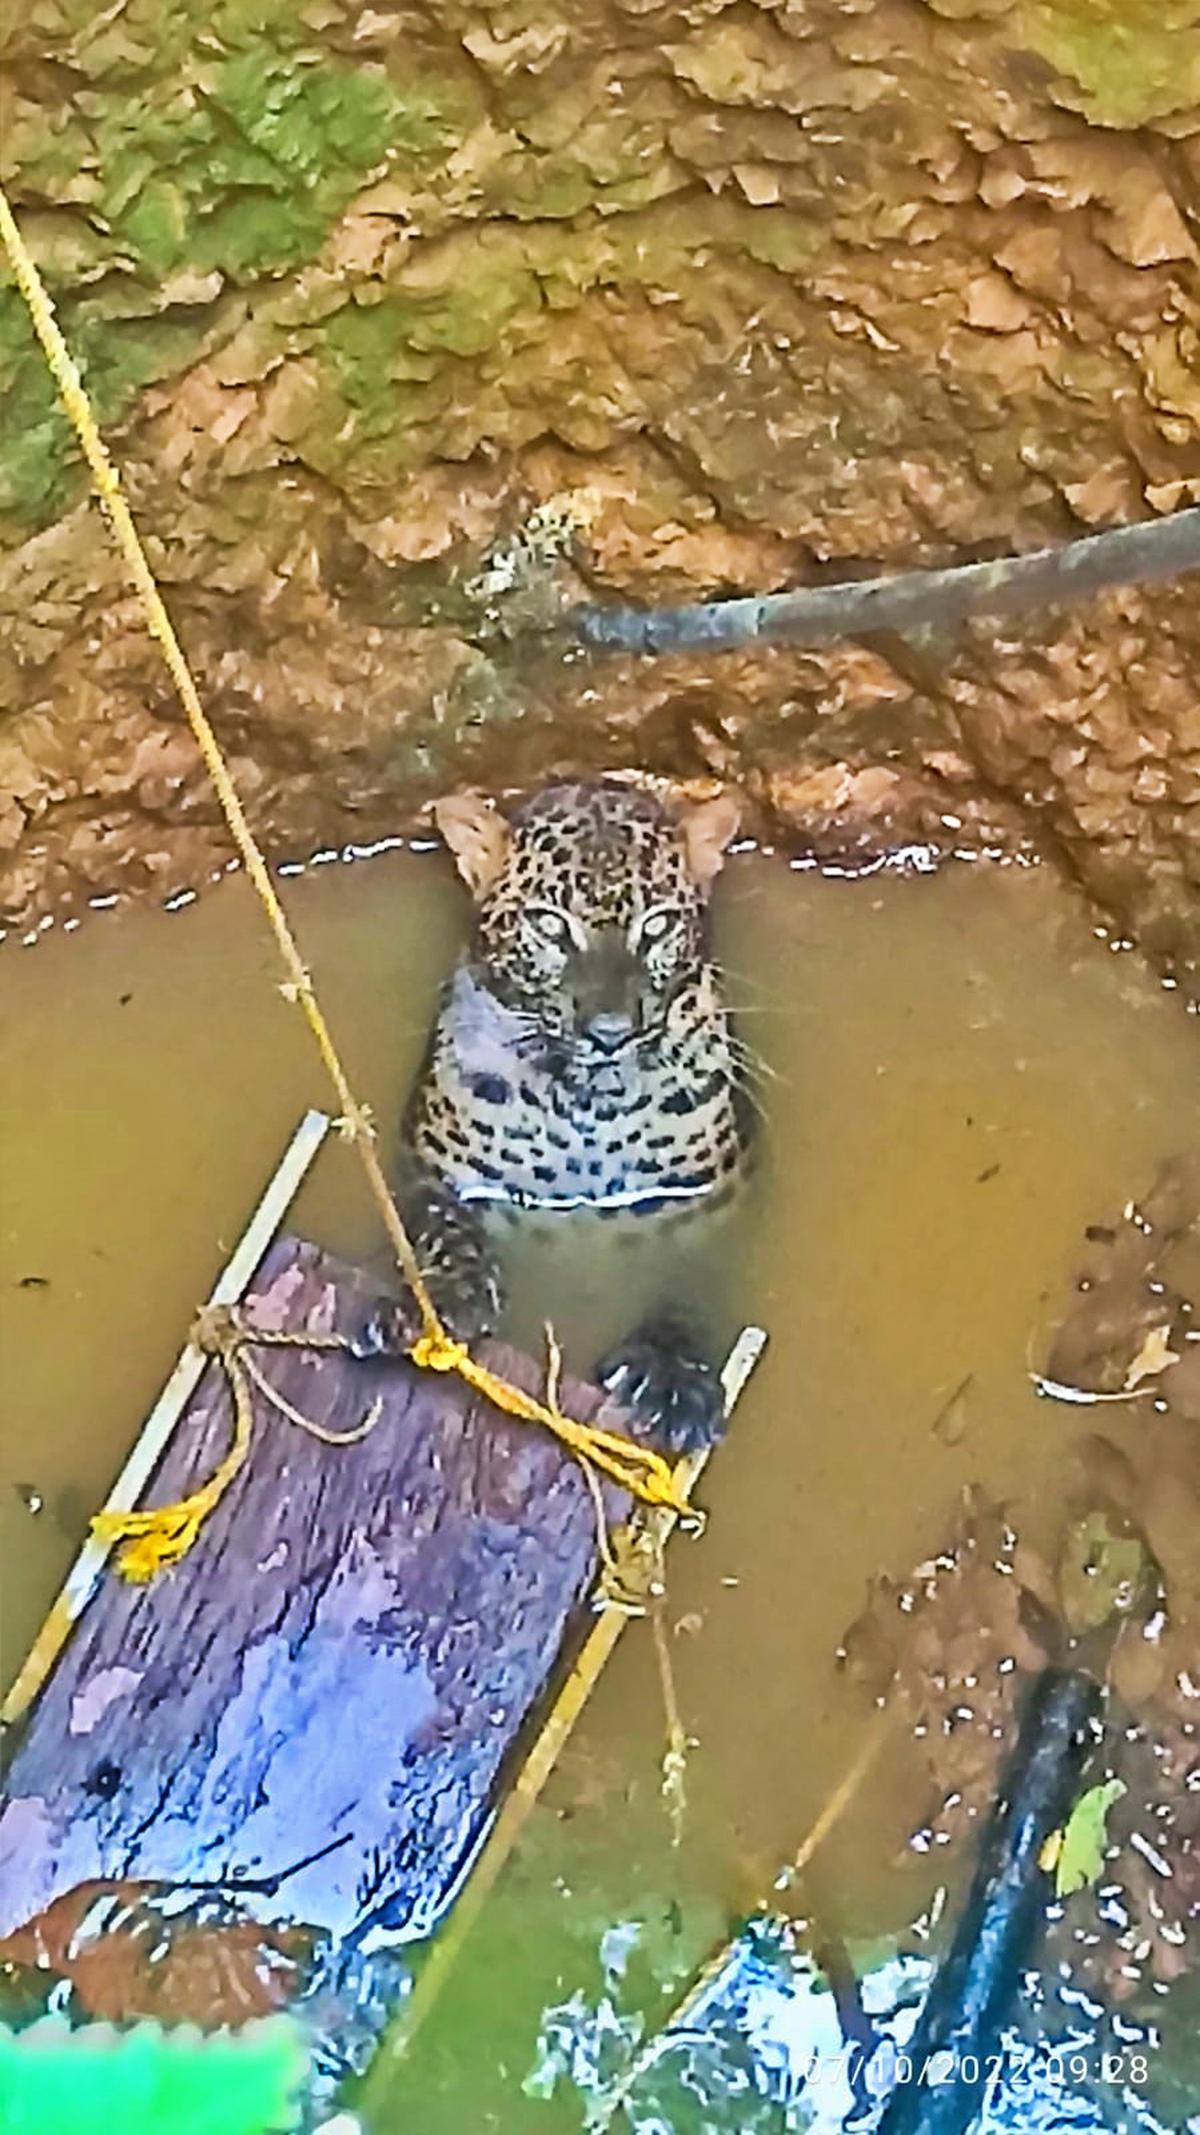 Forest personnel rescue leopard from open well in Wayanad